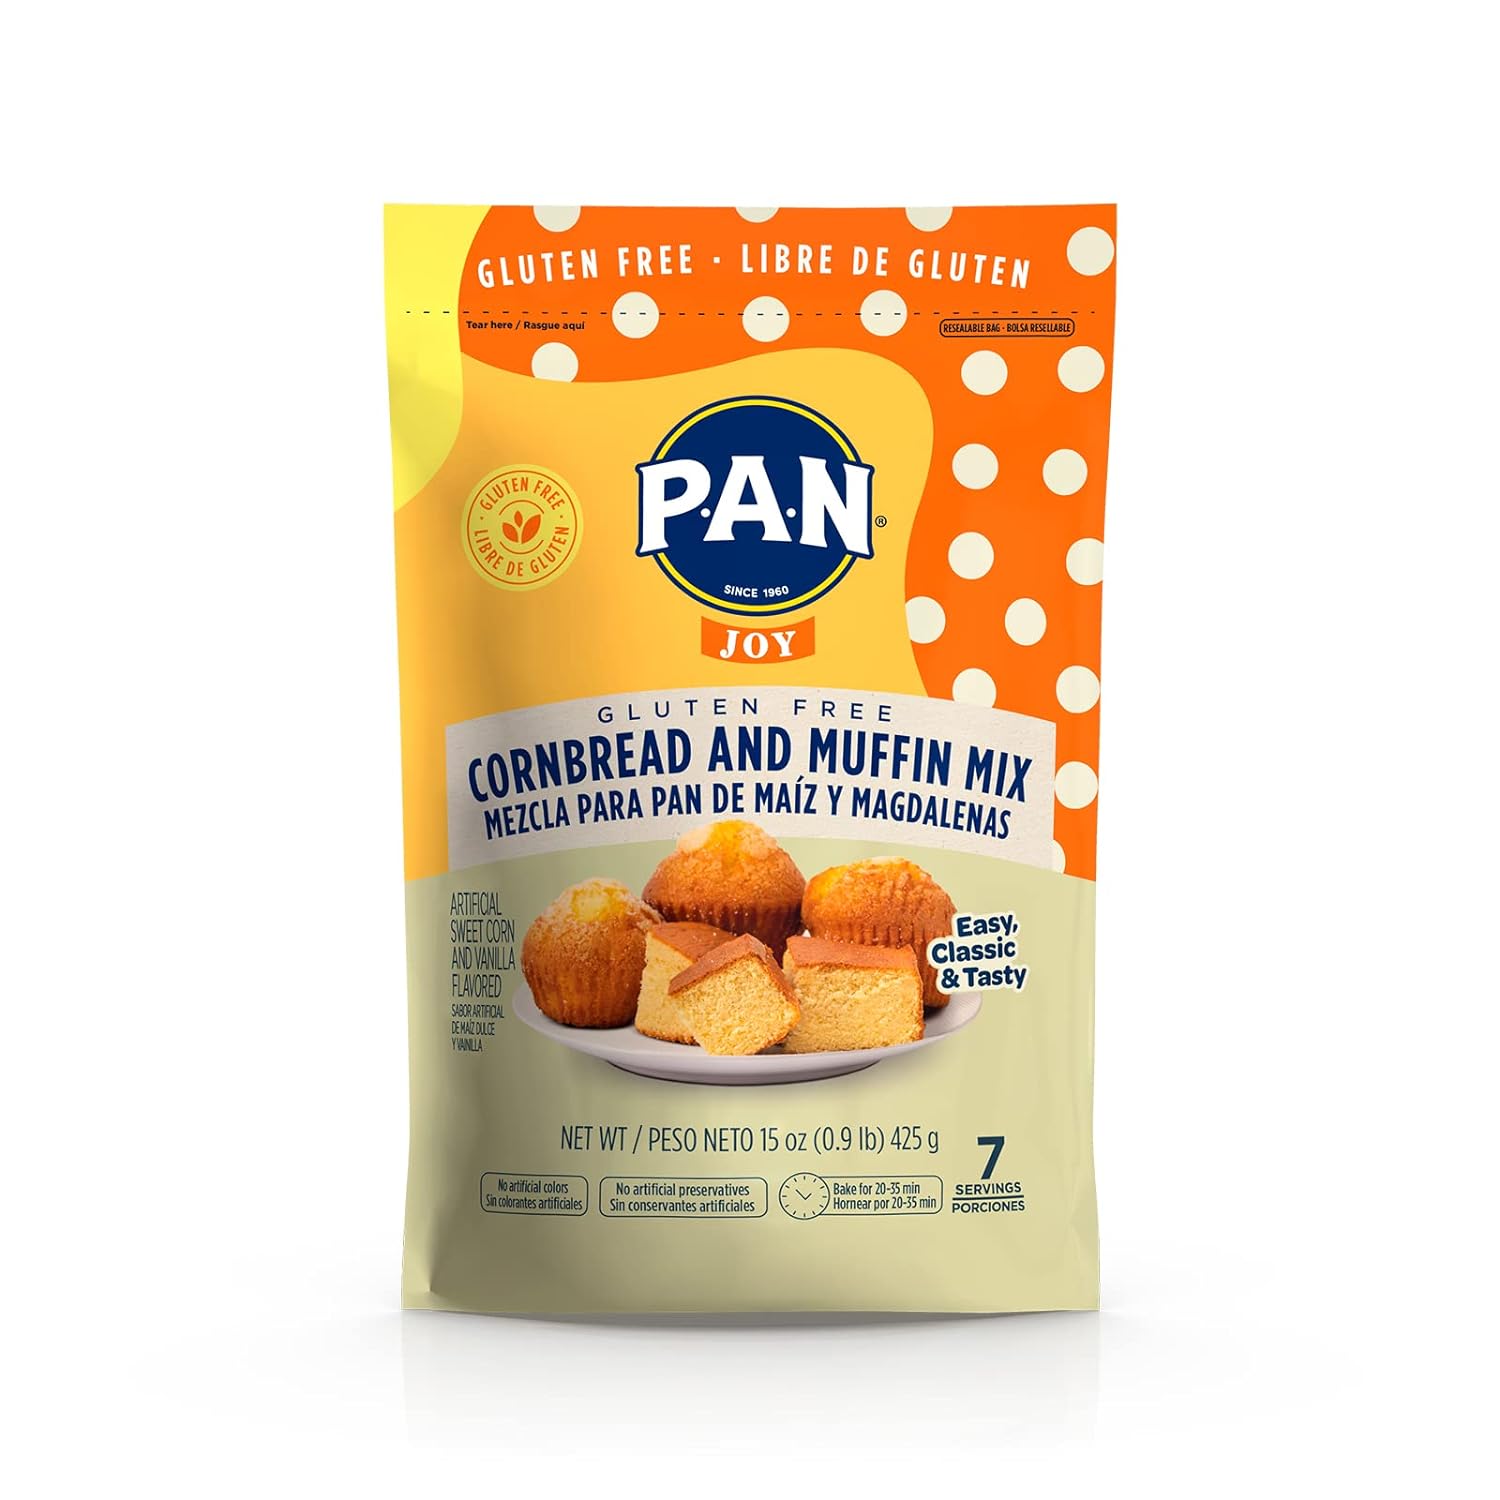 P.A.N Cornbread and Muffin Mix – Gluten Free Baking Mix 0.9 lb. (Pack of 1)